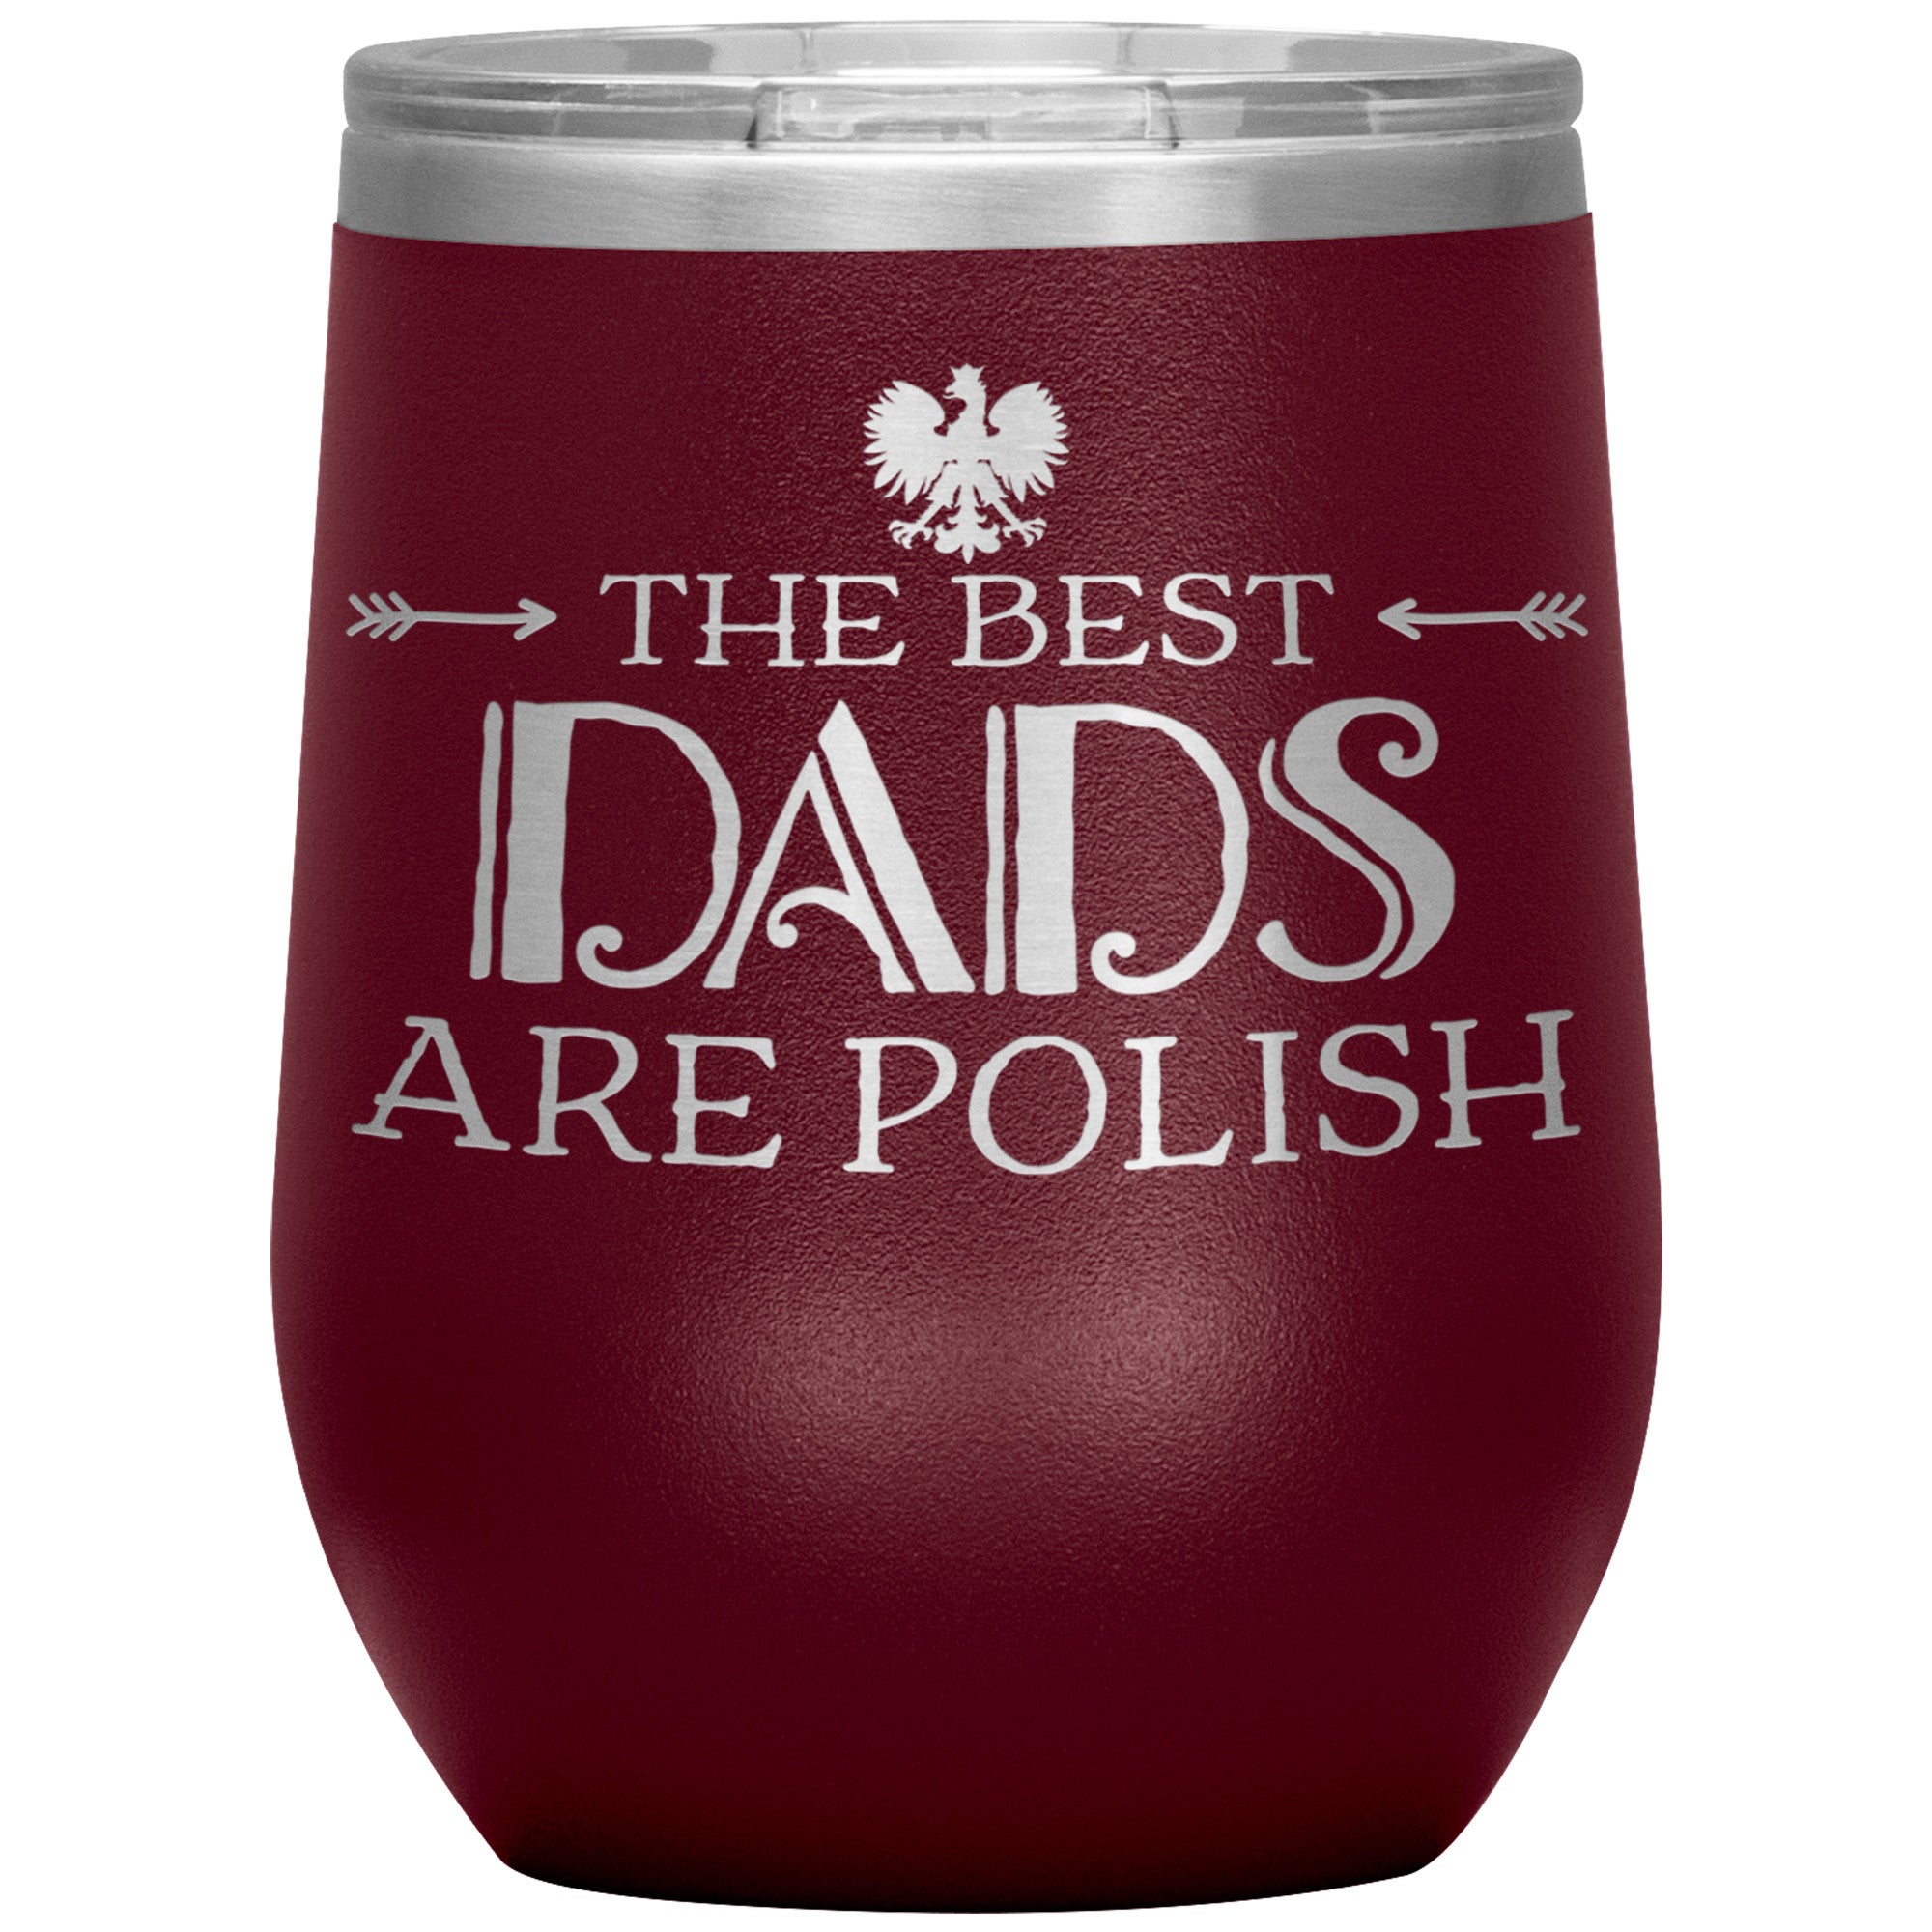 The Best Dads Are Polish Insulated Wine Tumbler Tumblers teelaunch Maroon  